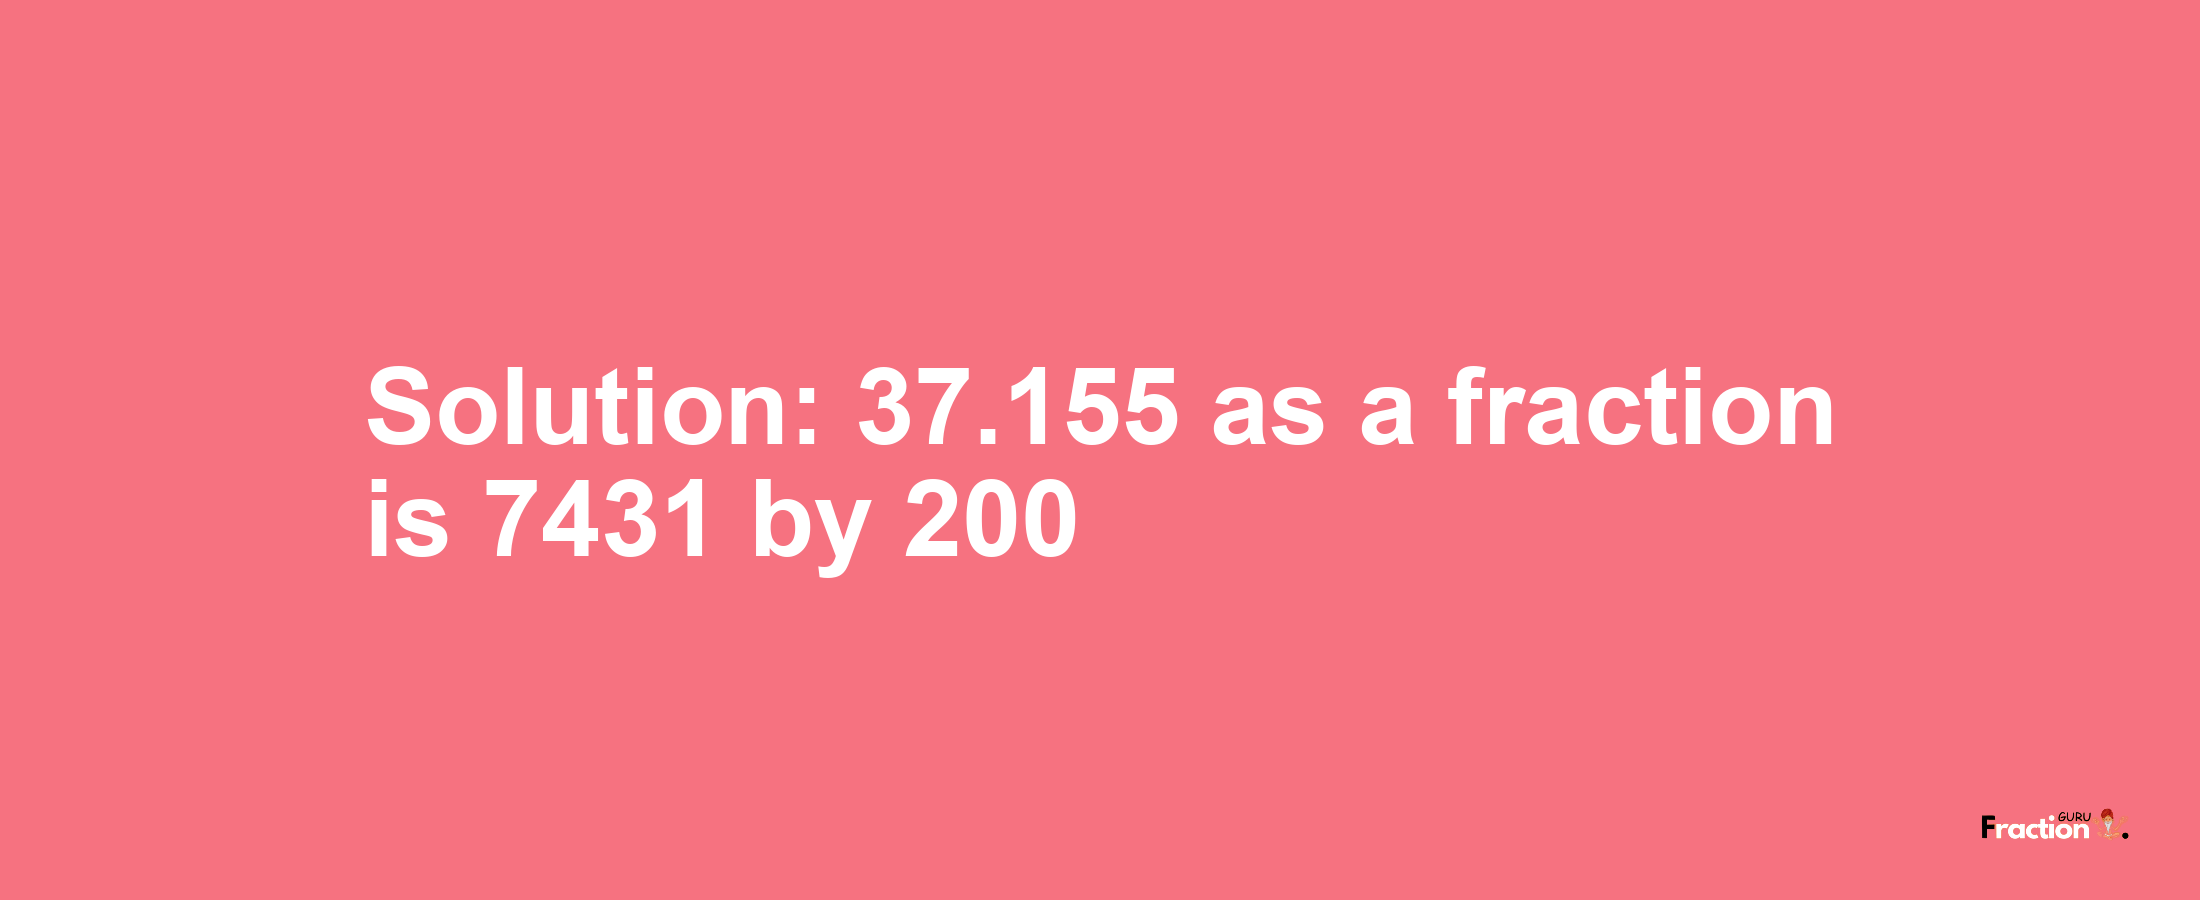 Solution:37.155 as a fraction is 7431/200